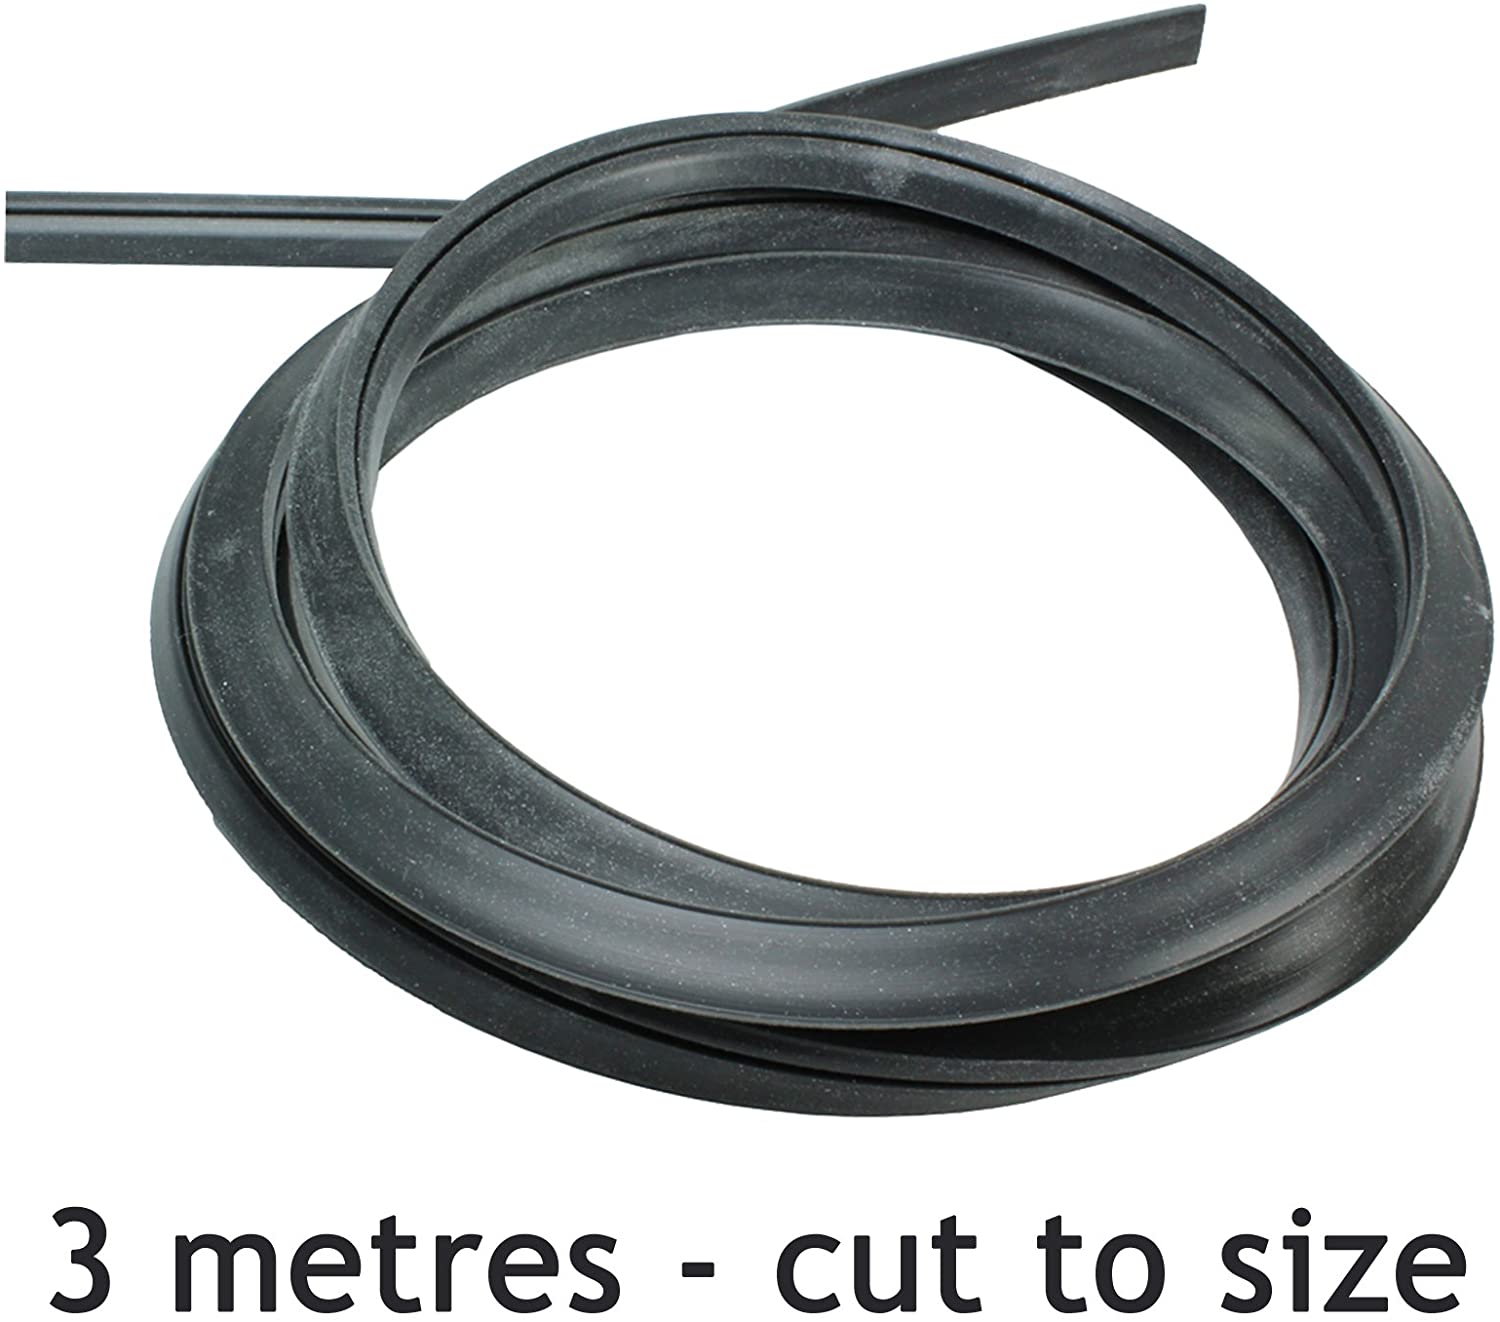 Door Seal + Silicone Glue for DIPLOMAT HYGENA Oven Cooker 3m Cut to Size (3 & 4 sided, Rounded + 90º Clips)